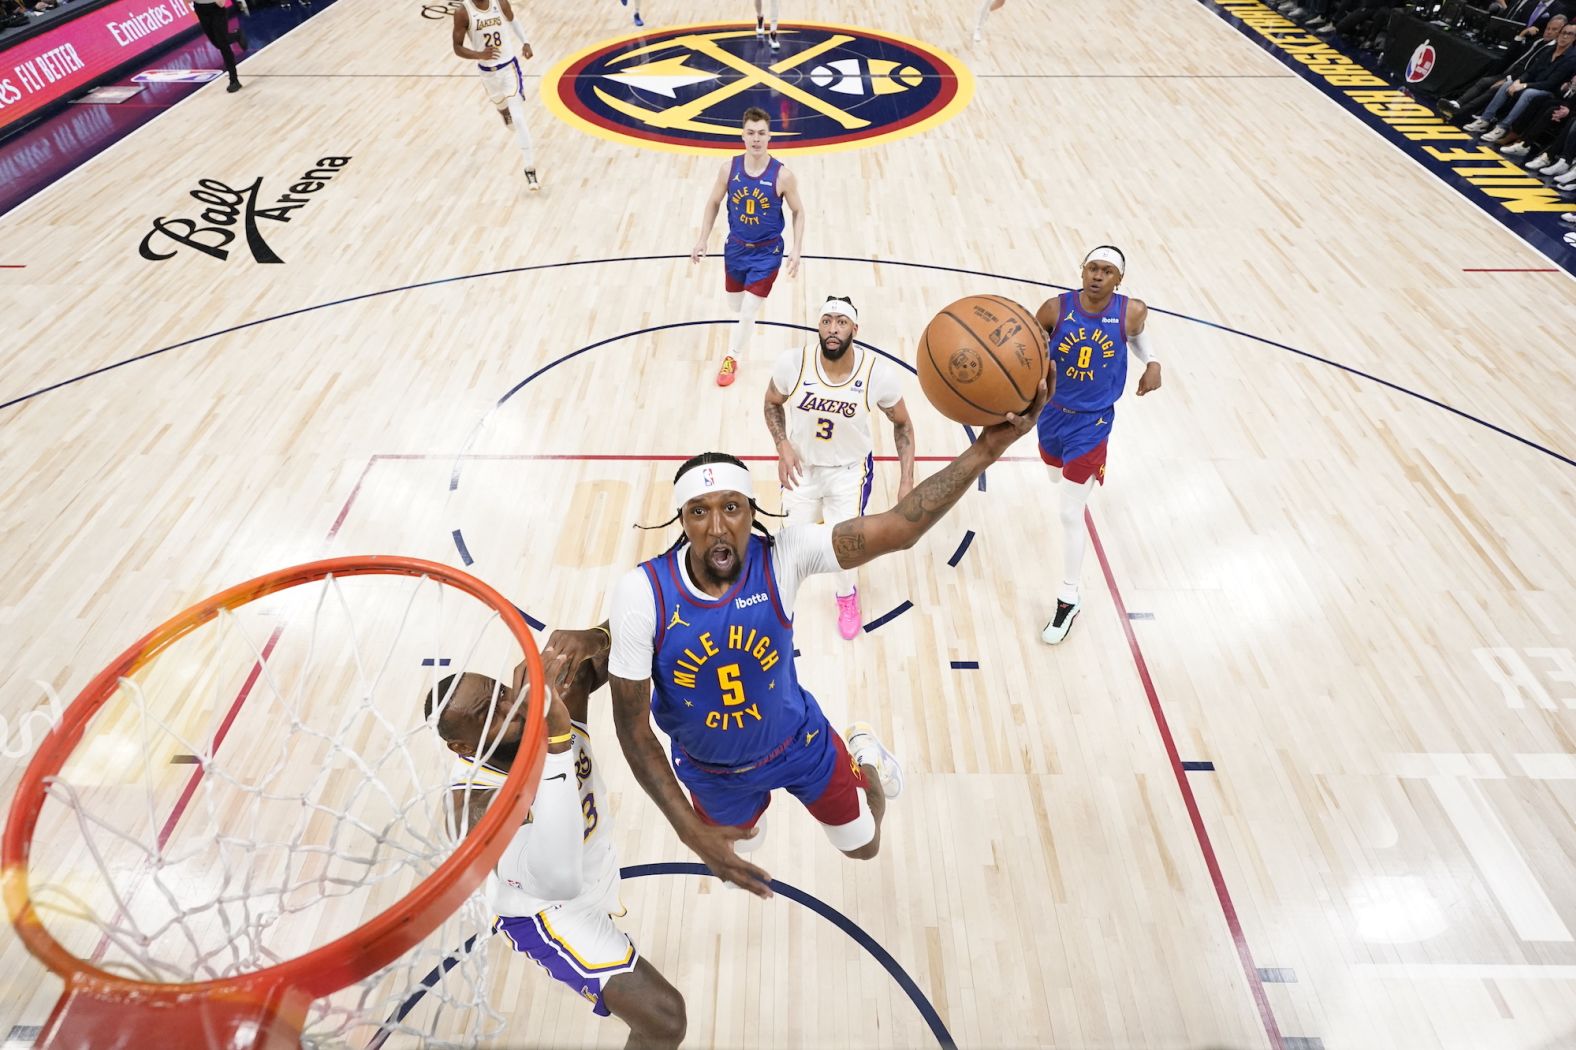 Denver Nuggets guard Kentavious Caldwell-Pope rises for a shot as he is defended by the Los Angeles Lakers' LeBron James during an NBA playoff game on Saturday, April 20. The defending champion Nuggets won the opening game of the series.